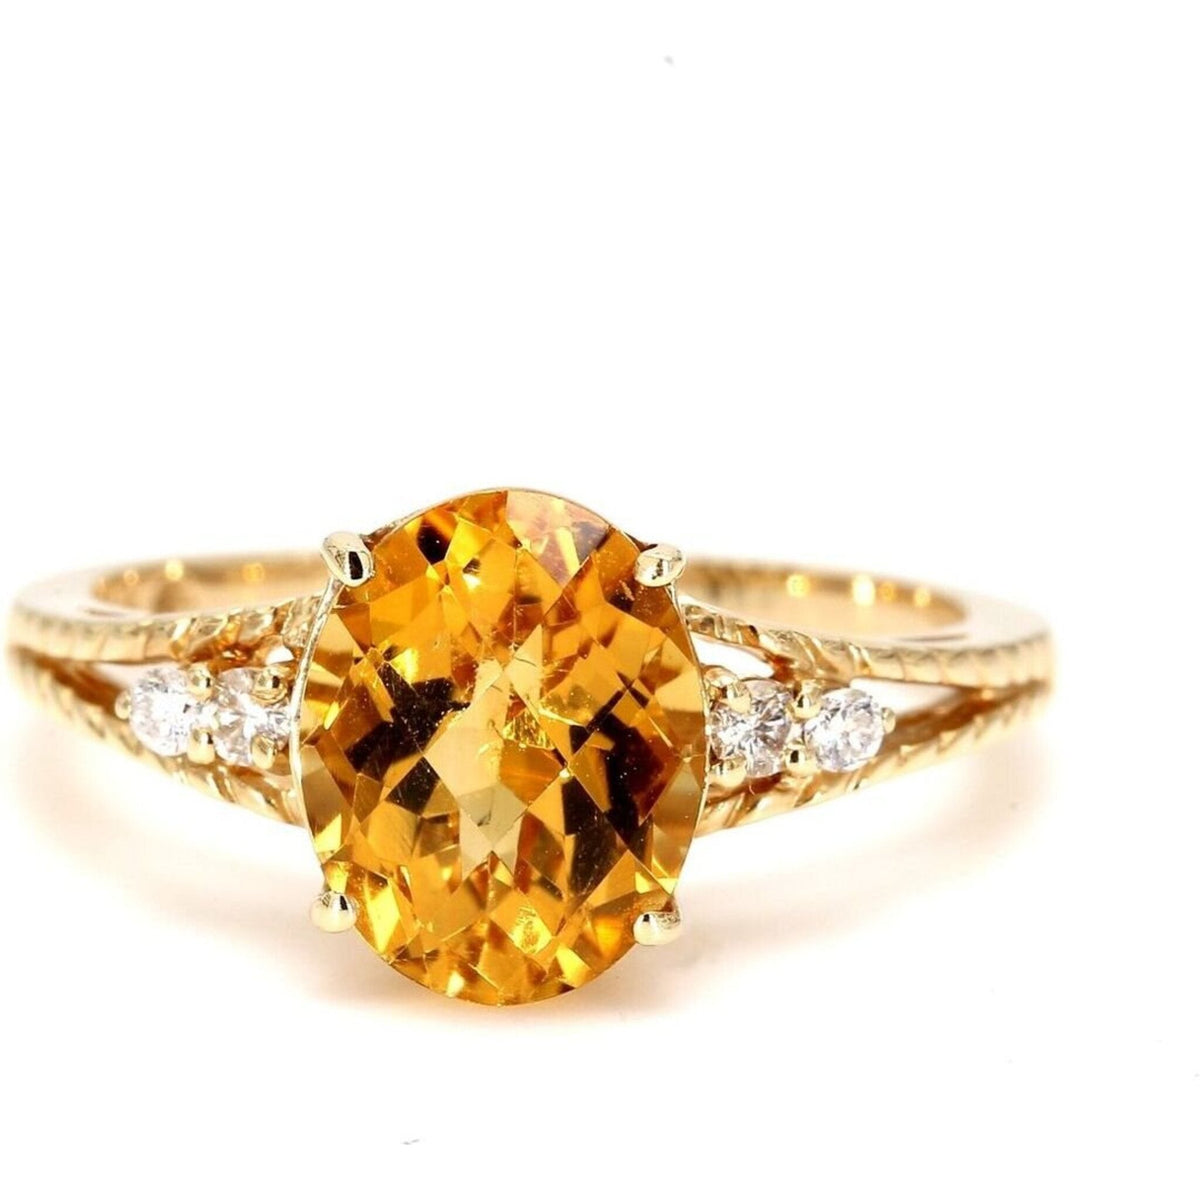 Elegant yellow gold citrine and diamond ring, perfect for daily wear.